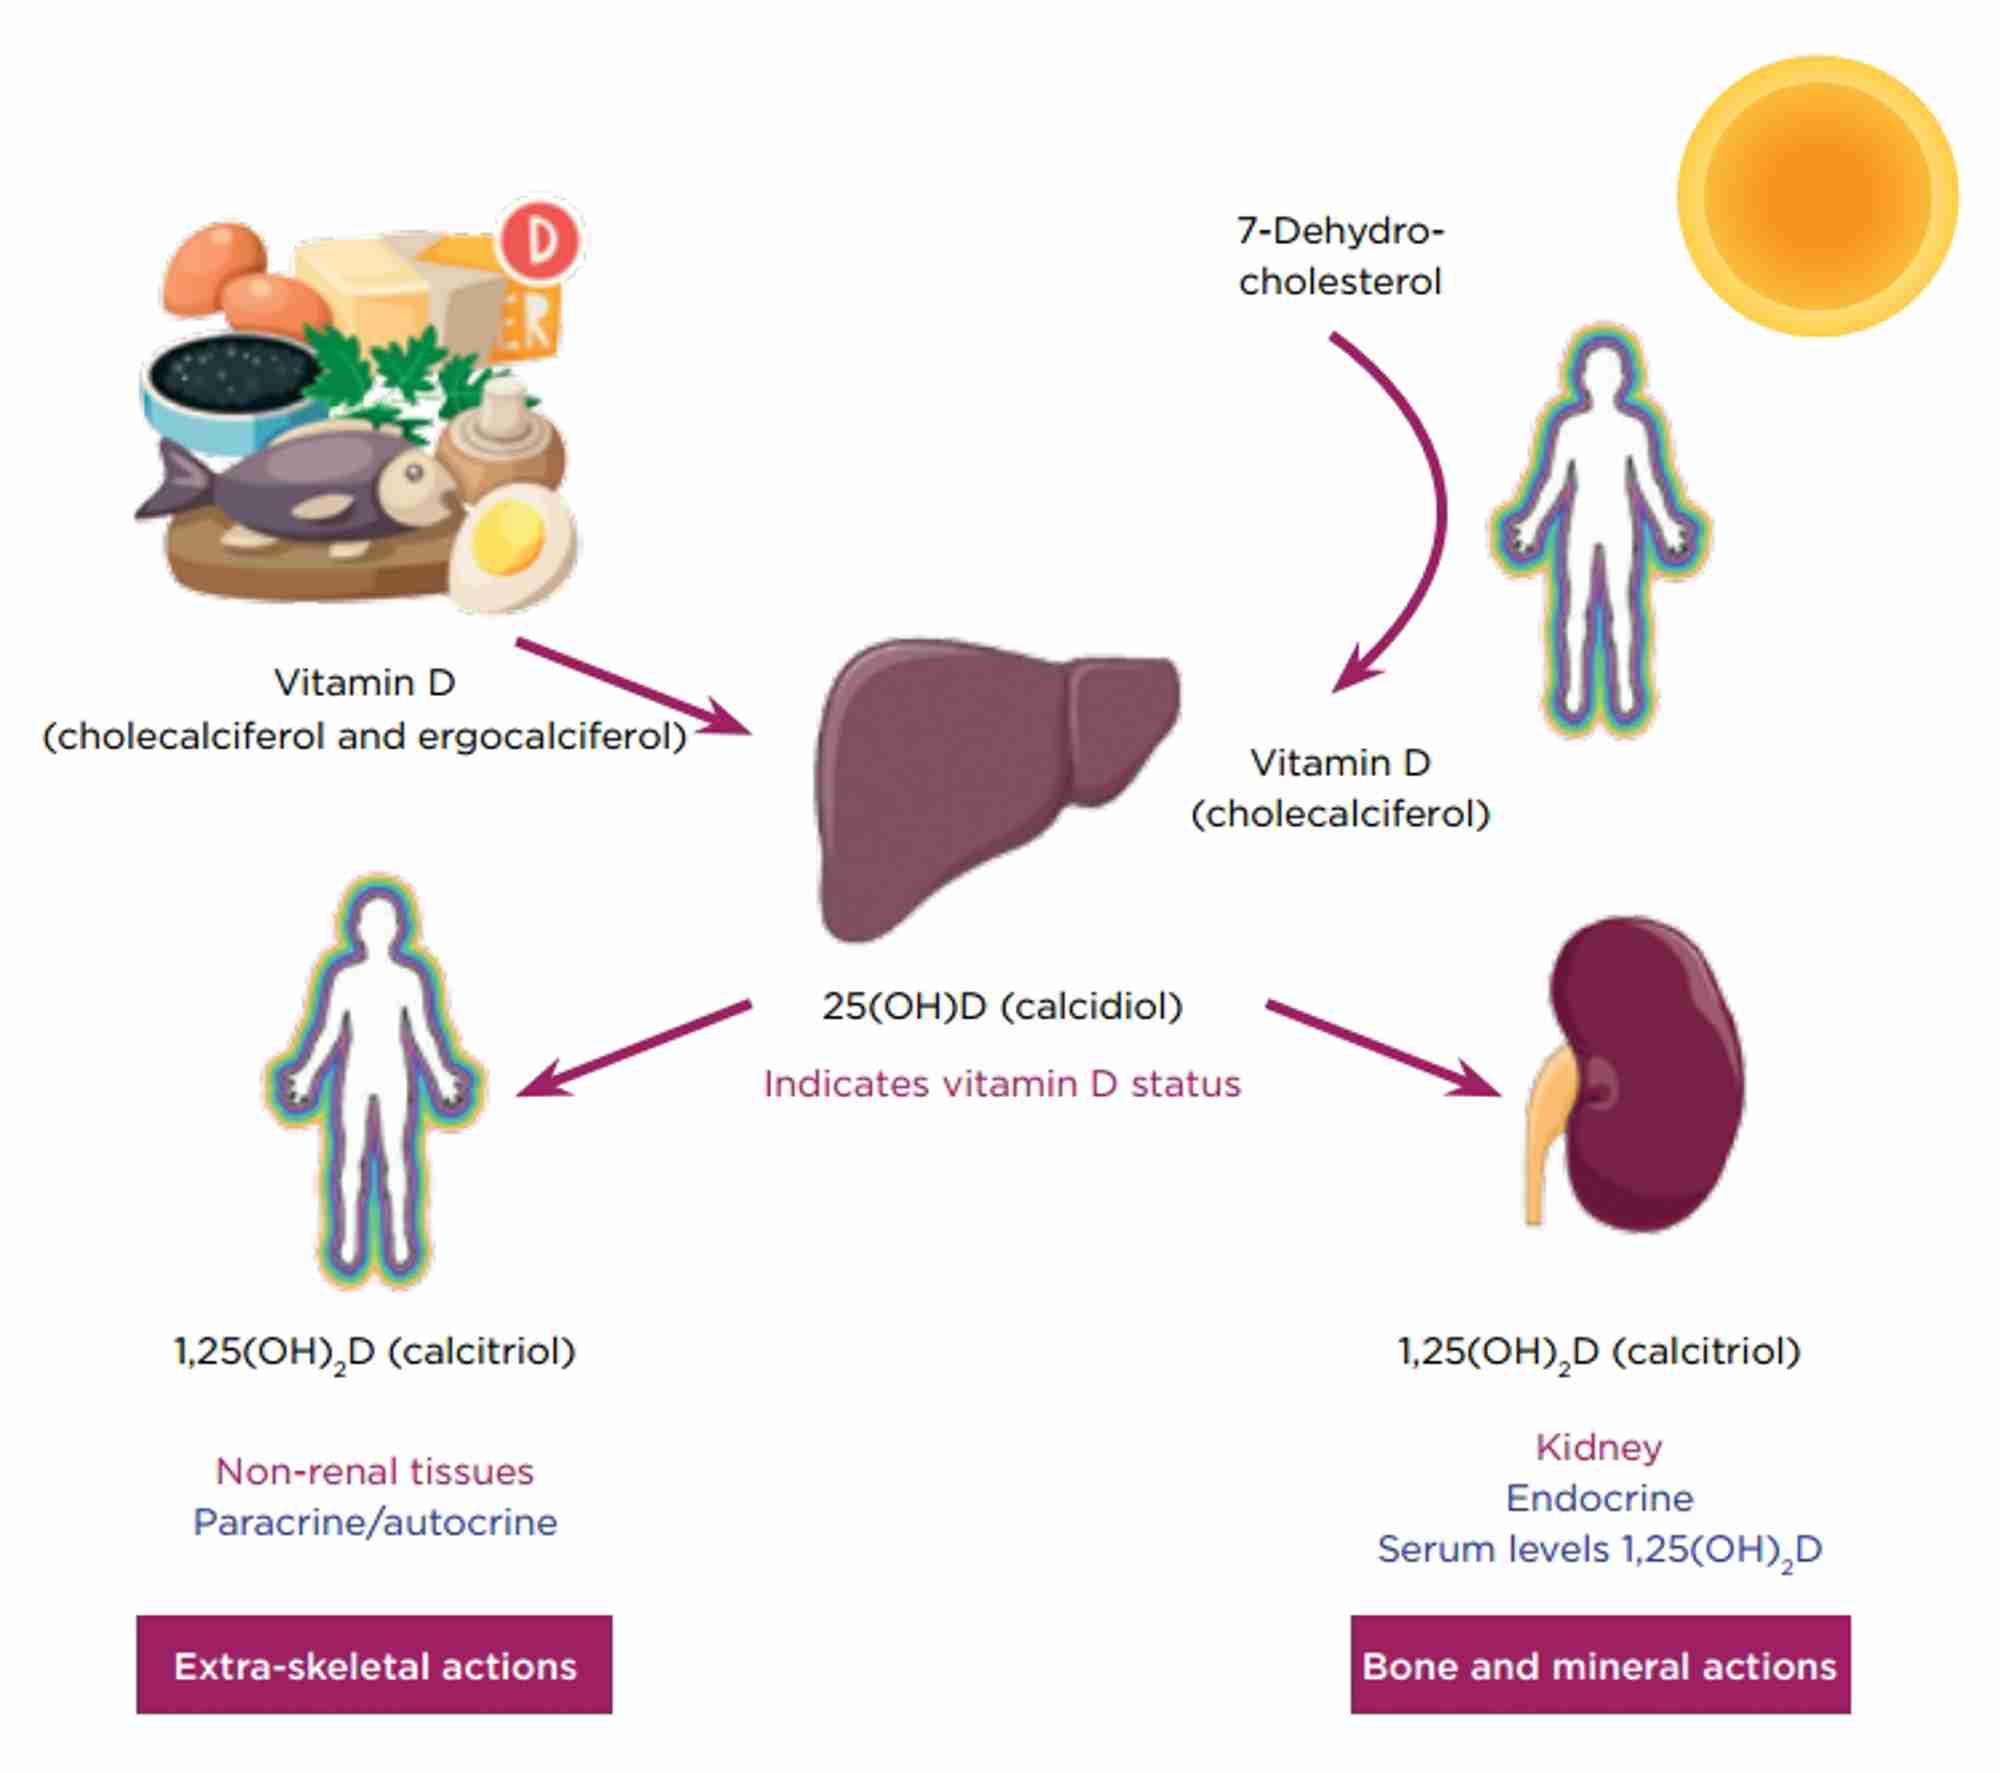 Vitamin D is obtained from the diet or synthesised in the skin by the conversion of 7-dehydrocholesterol, a reaction mediated by UV light (290–320nm). Hydroxylation of vitamin D in the liver produces 25-hydroxyvitamin D (25(OH)D; calcidiol). A further hydroxylation step, catalysed by 25(OH)D 1α-hydroxylase, produces the active hormone 1,25-dihydroxyvitamin D (1,25(OH)2D; calcitriol). Liver/kidneys &#169;Servier Medical Art; Person &#169;Clipart.co; Vitamin D &#169;Shutterstock